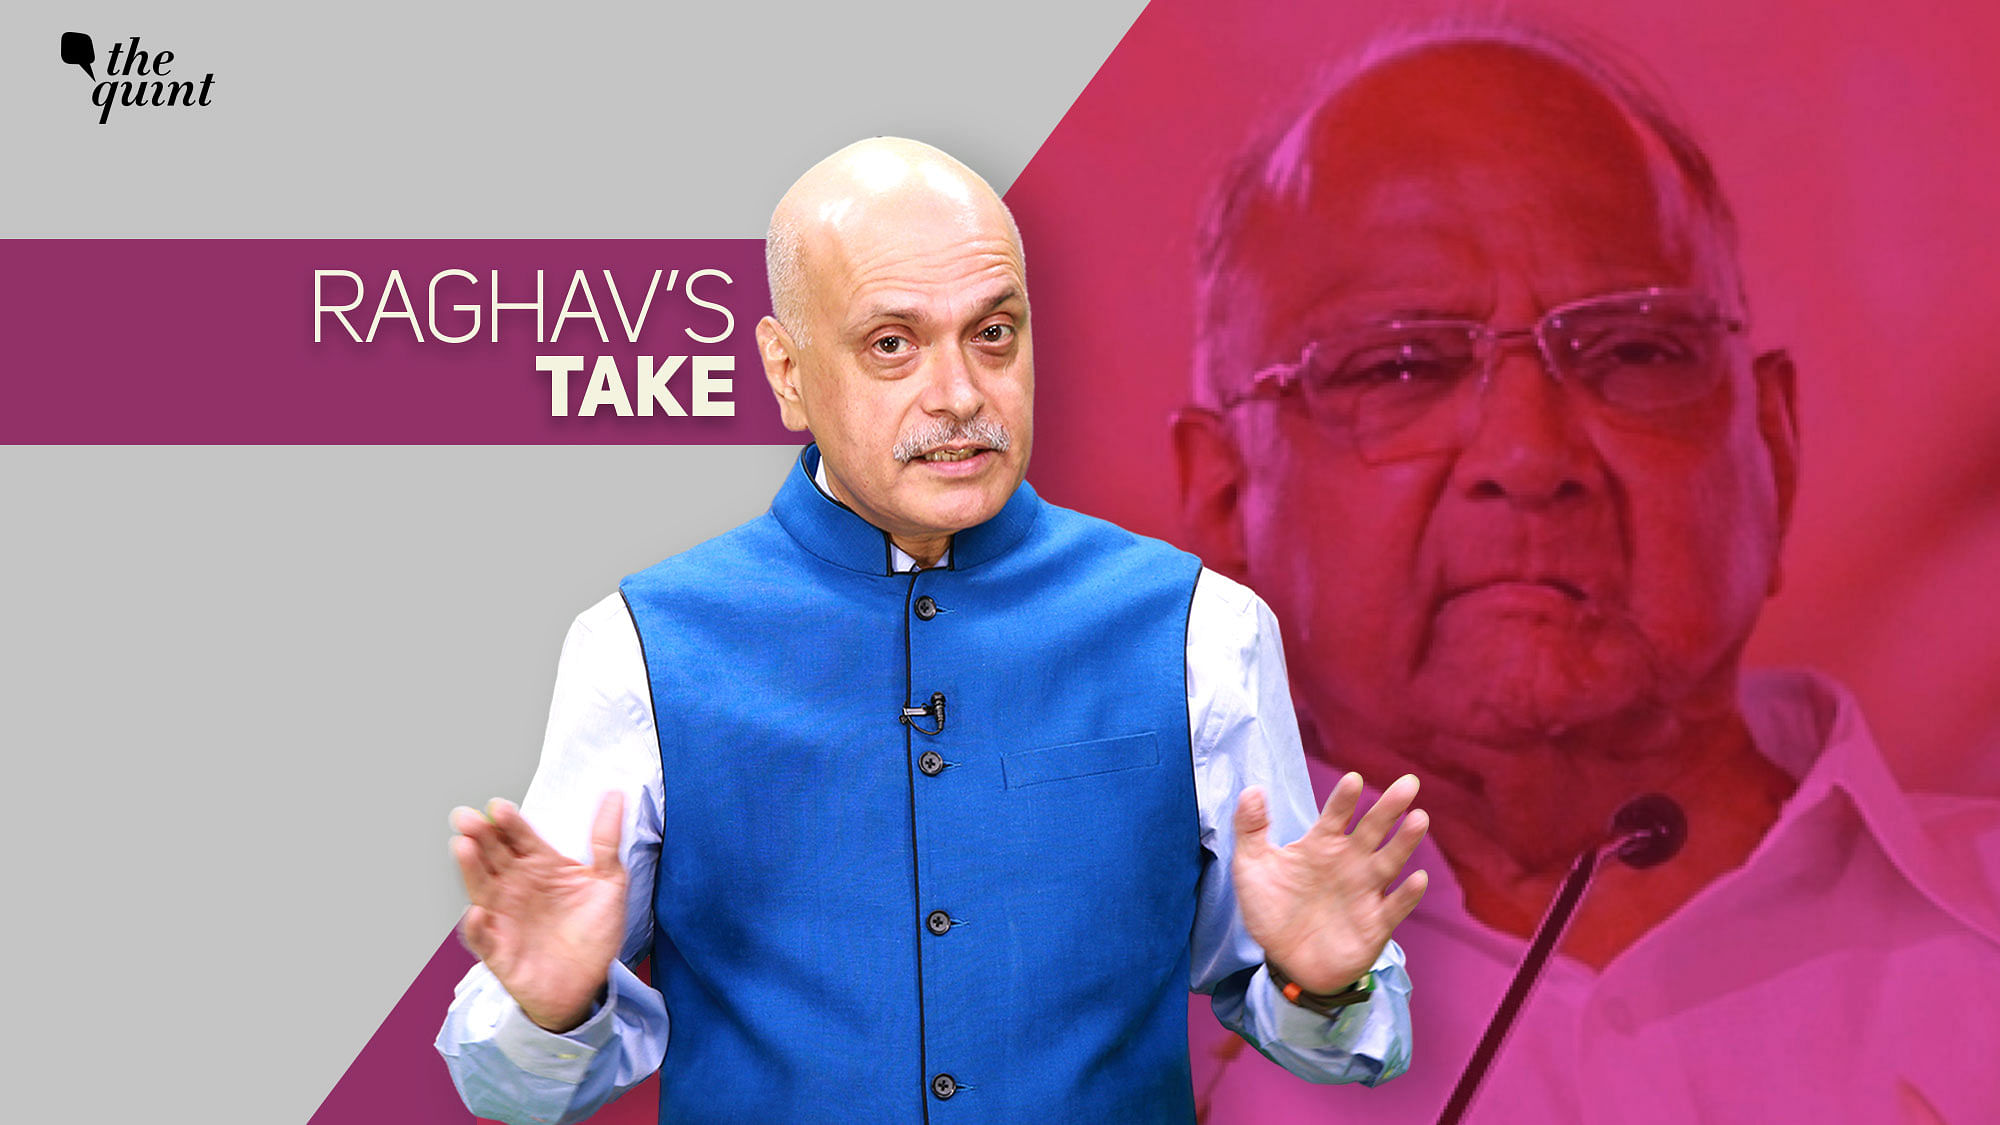 The Quint’s Editor-in-Chief Raghav Bahl analyses Sharad Pawar’s bid to forge an Opposition unity to defeat the BJP.